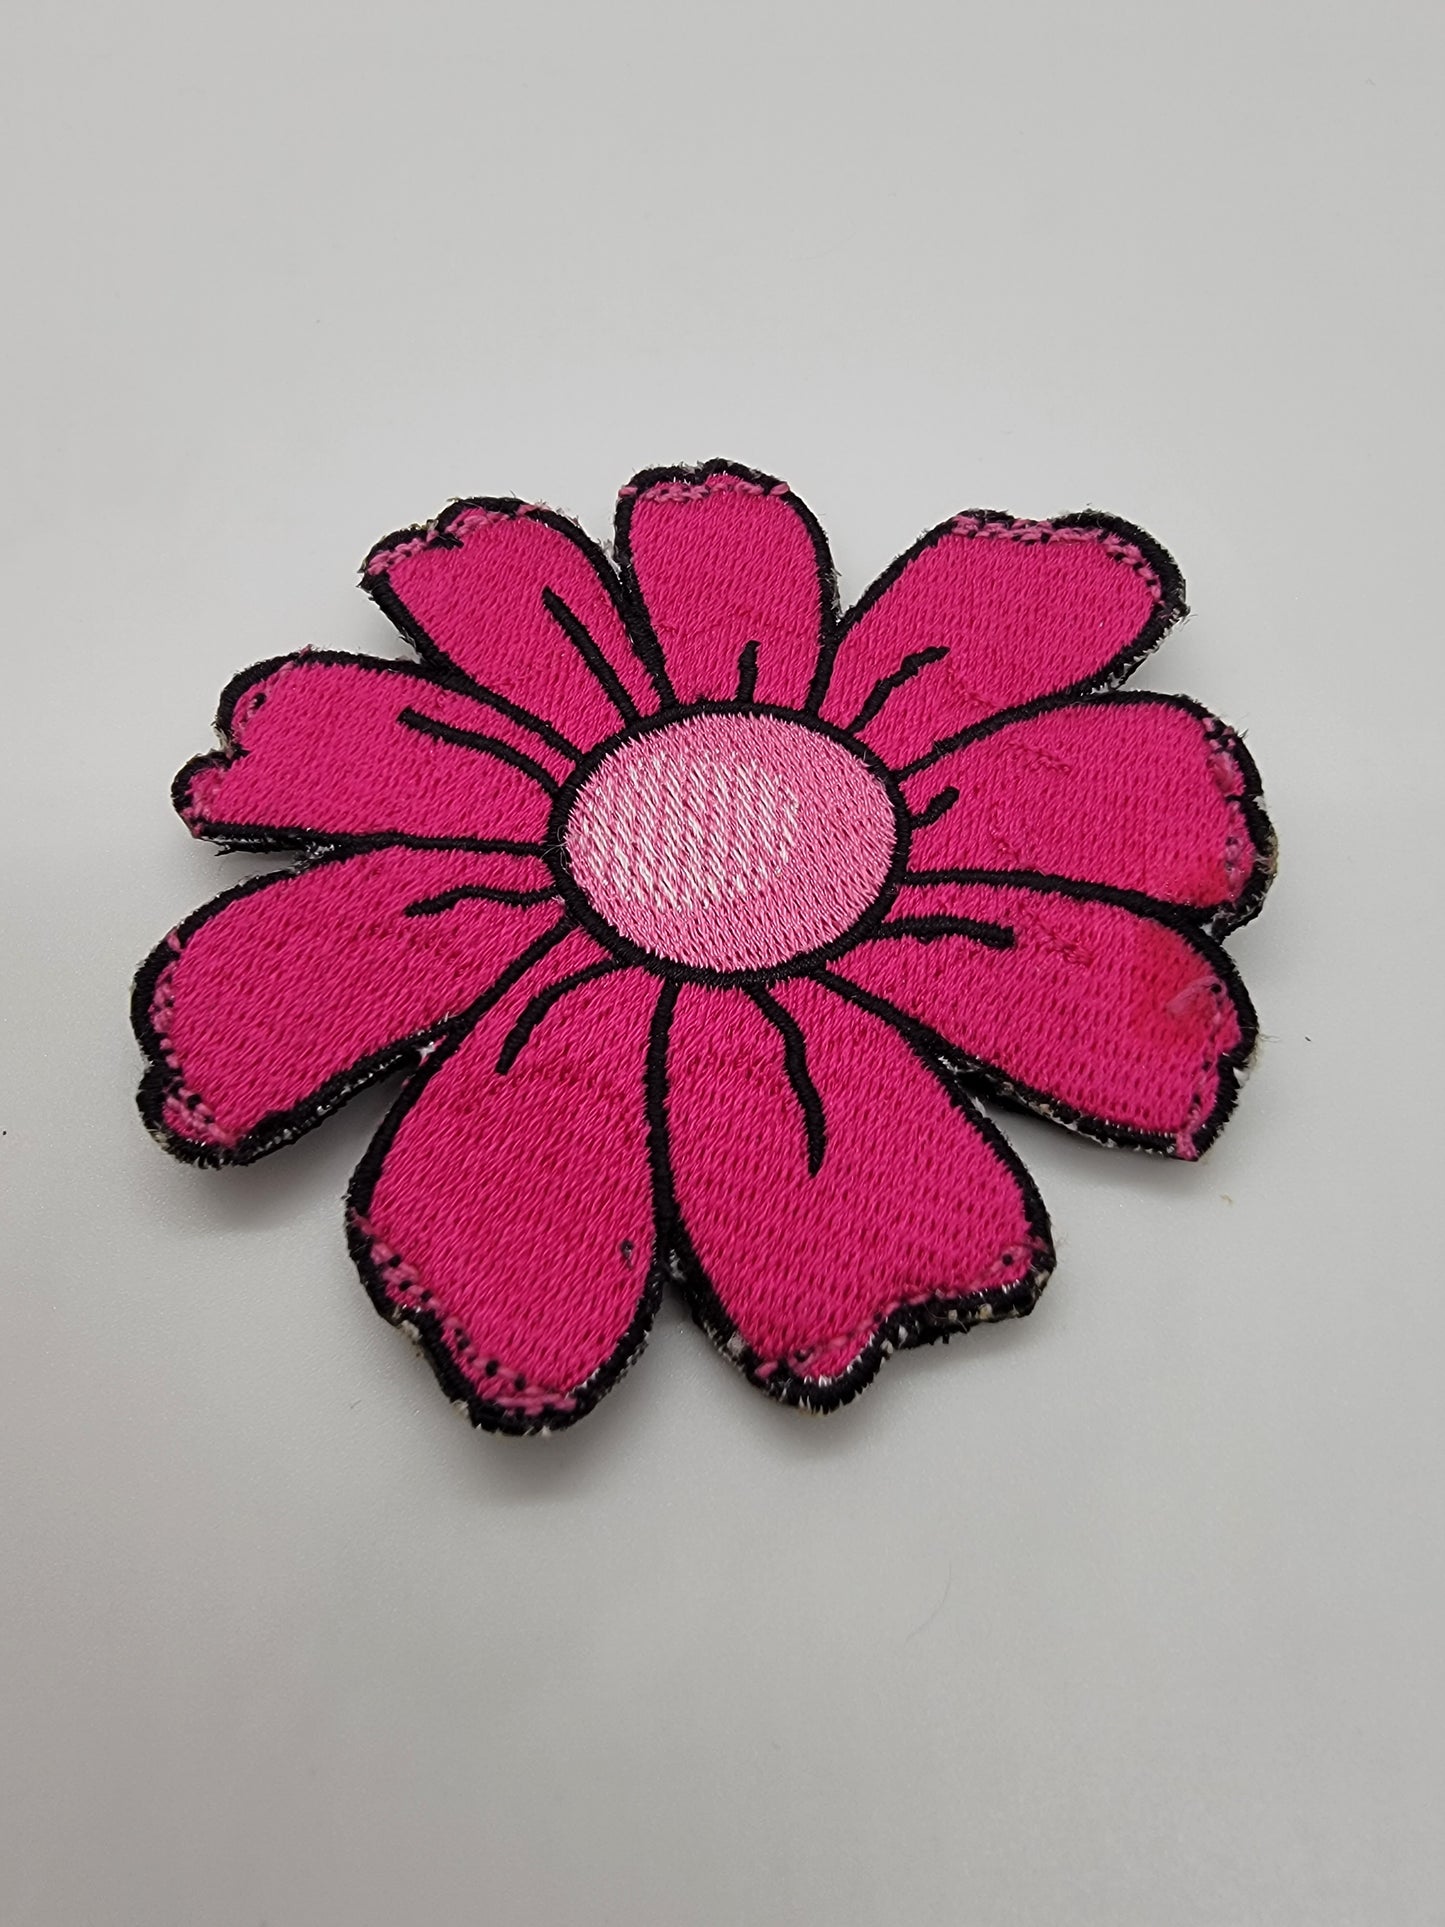 Embroidery "Pink Flower" velcro Patch